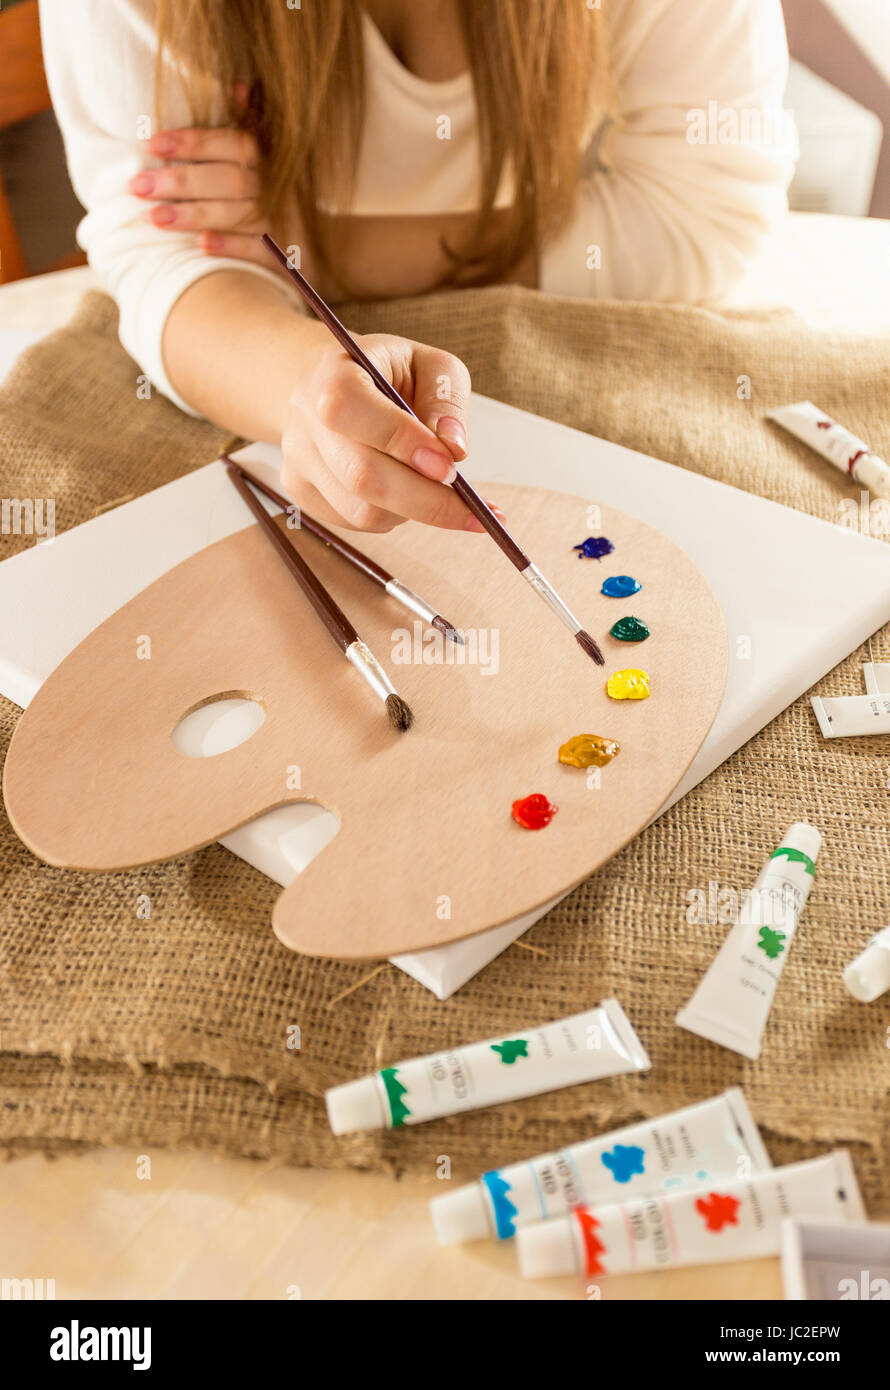 Closeup photo of young female artist sitting at table and drawing on canvas Stock Photo